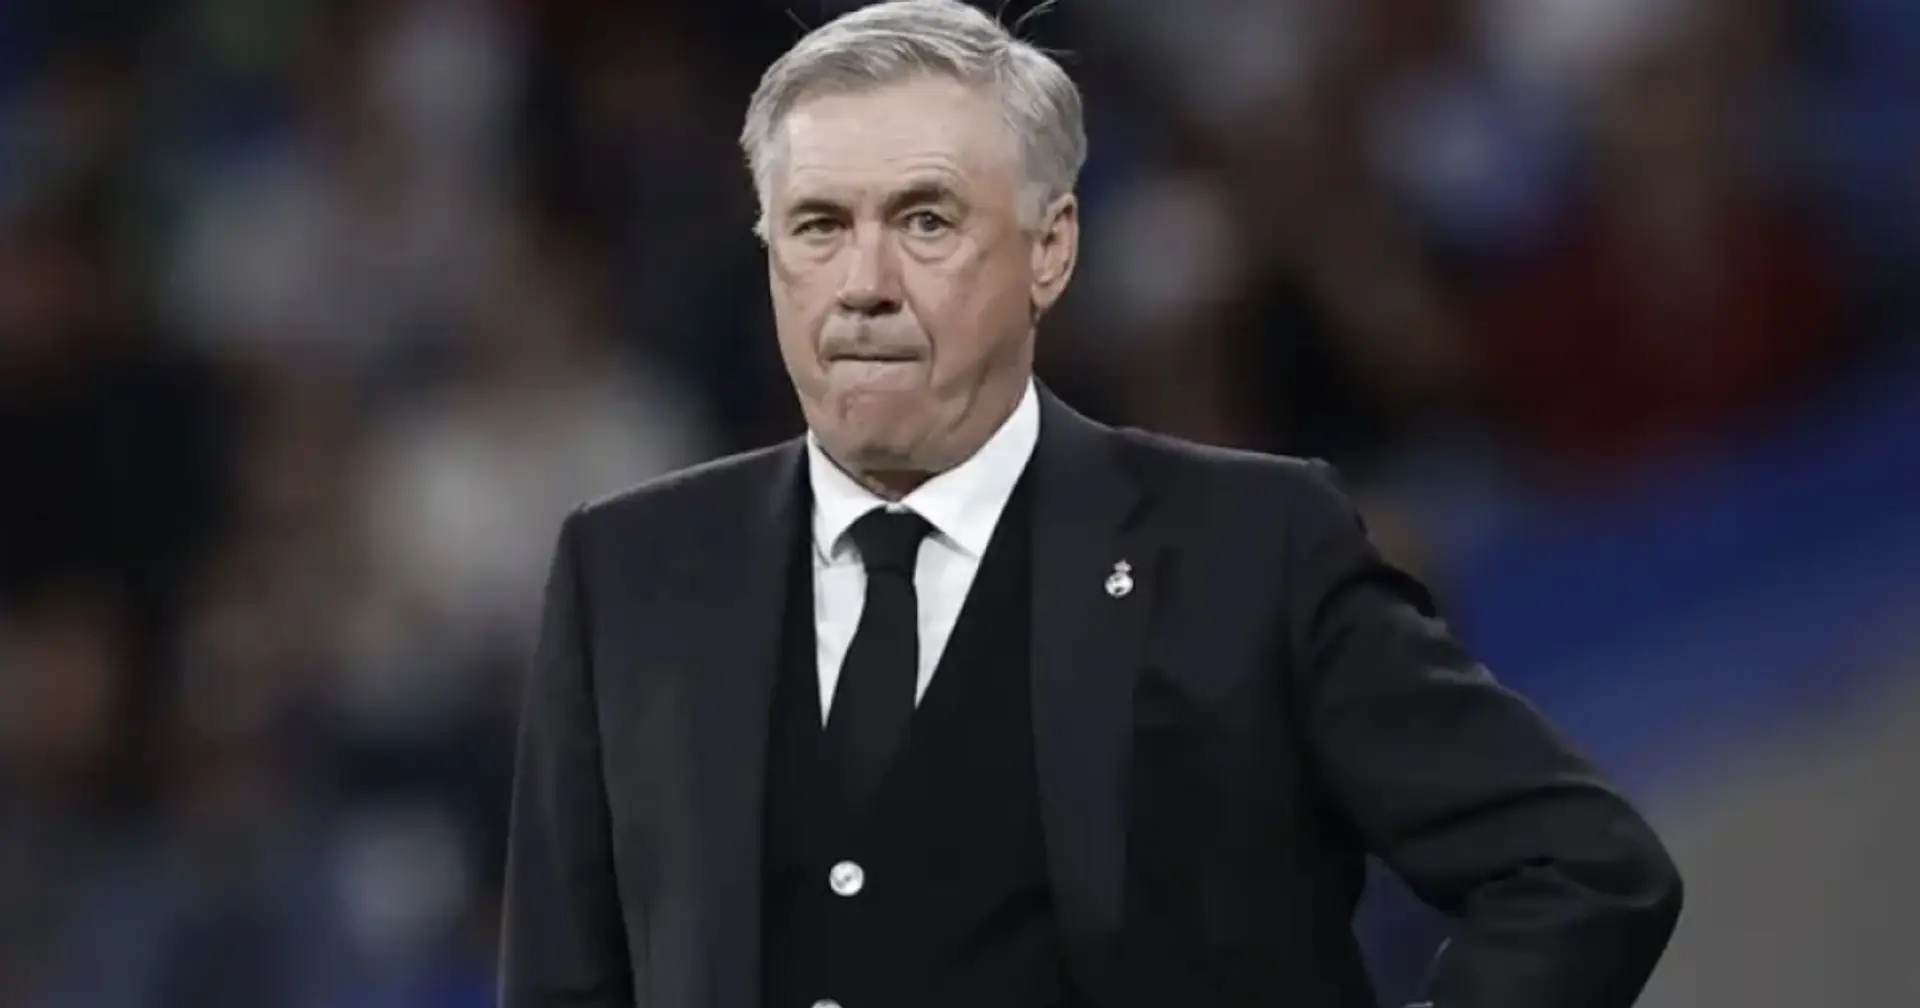 Ancelotti says he'll drop one player for Almeria game after Atleti loss